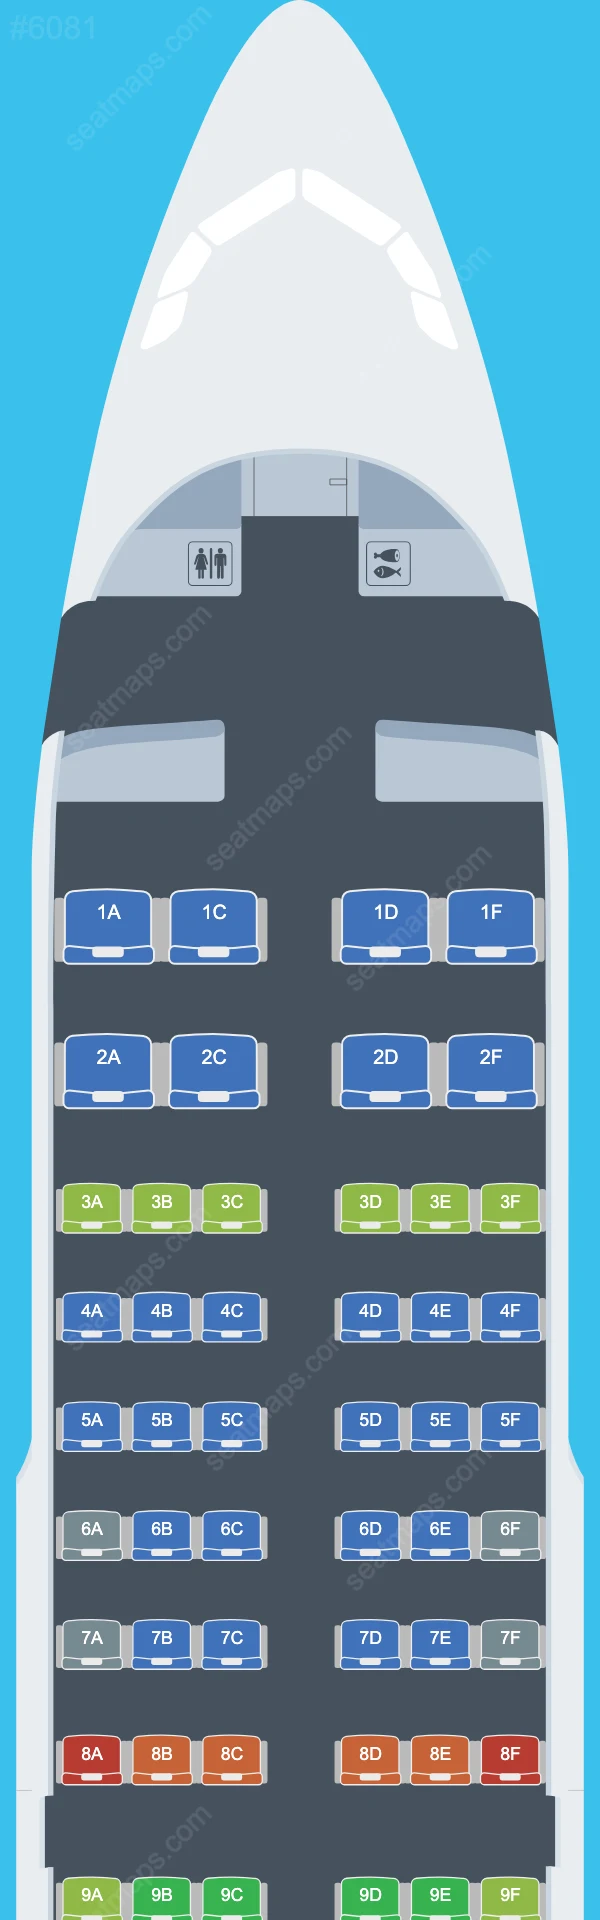 Rossiya Airbus A319-100 seatmap mobile preview